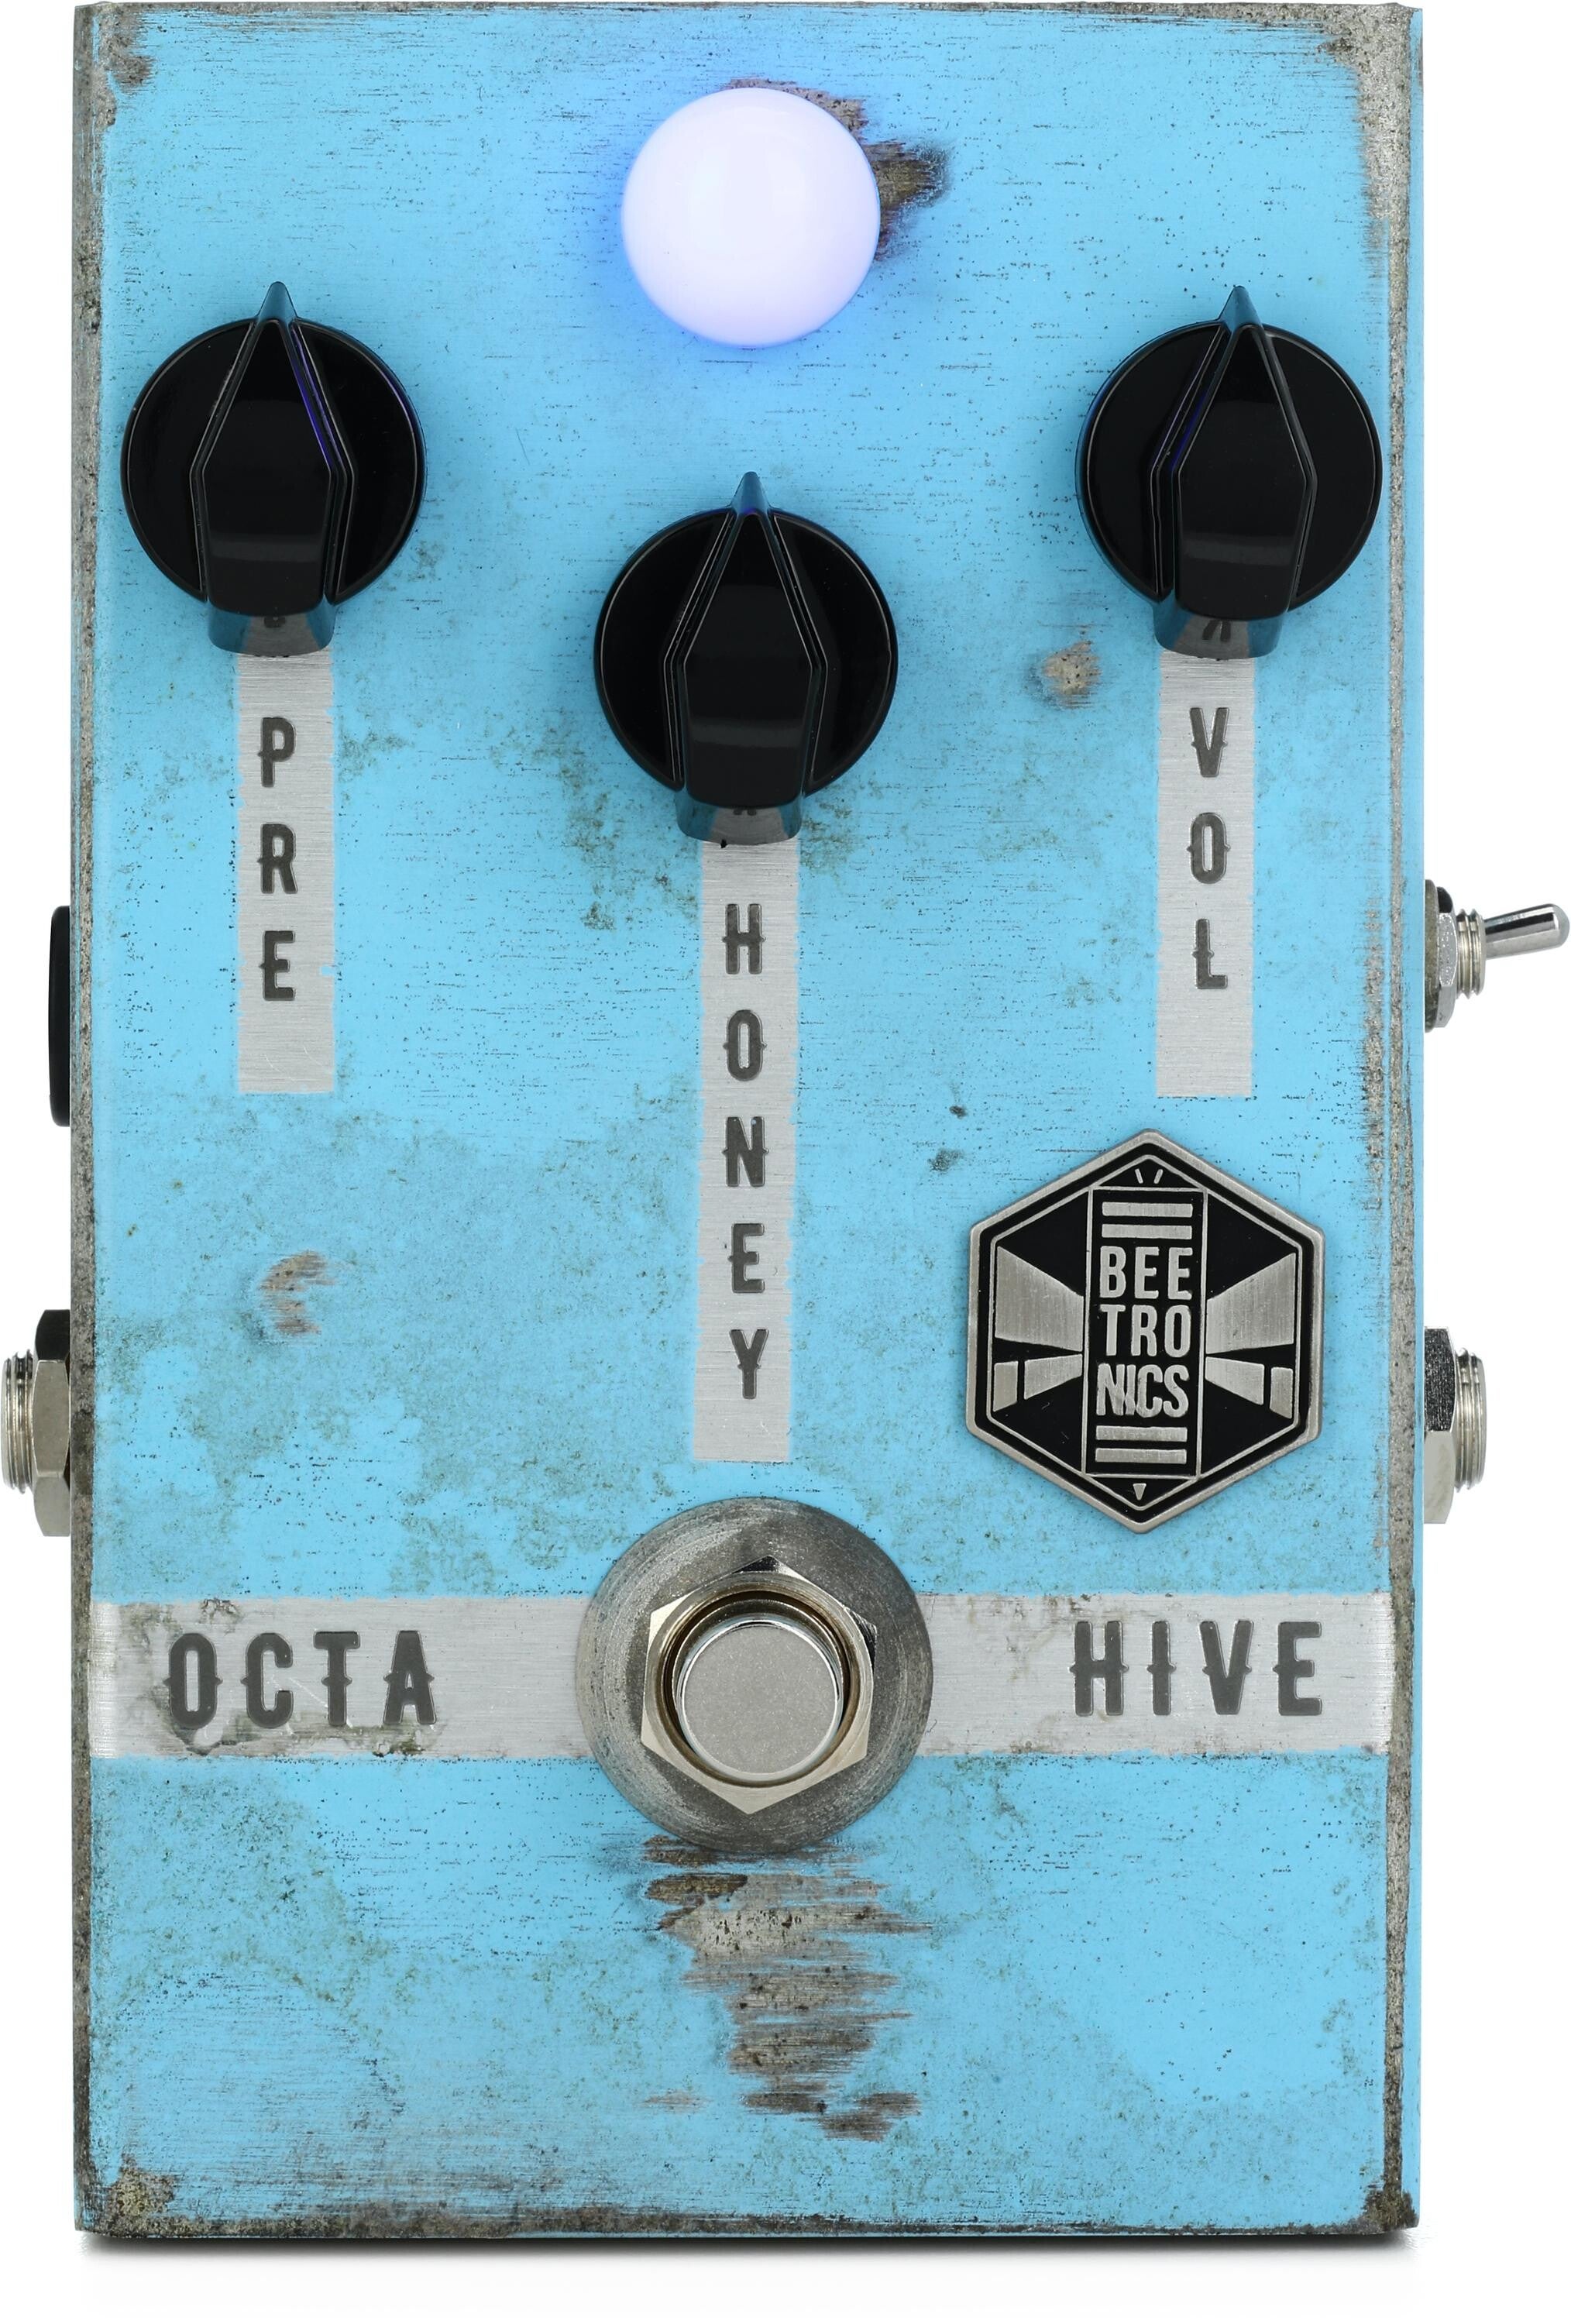 Beetronics FX OctaHive High Octave Fuzz Pedal | Sweetwater